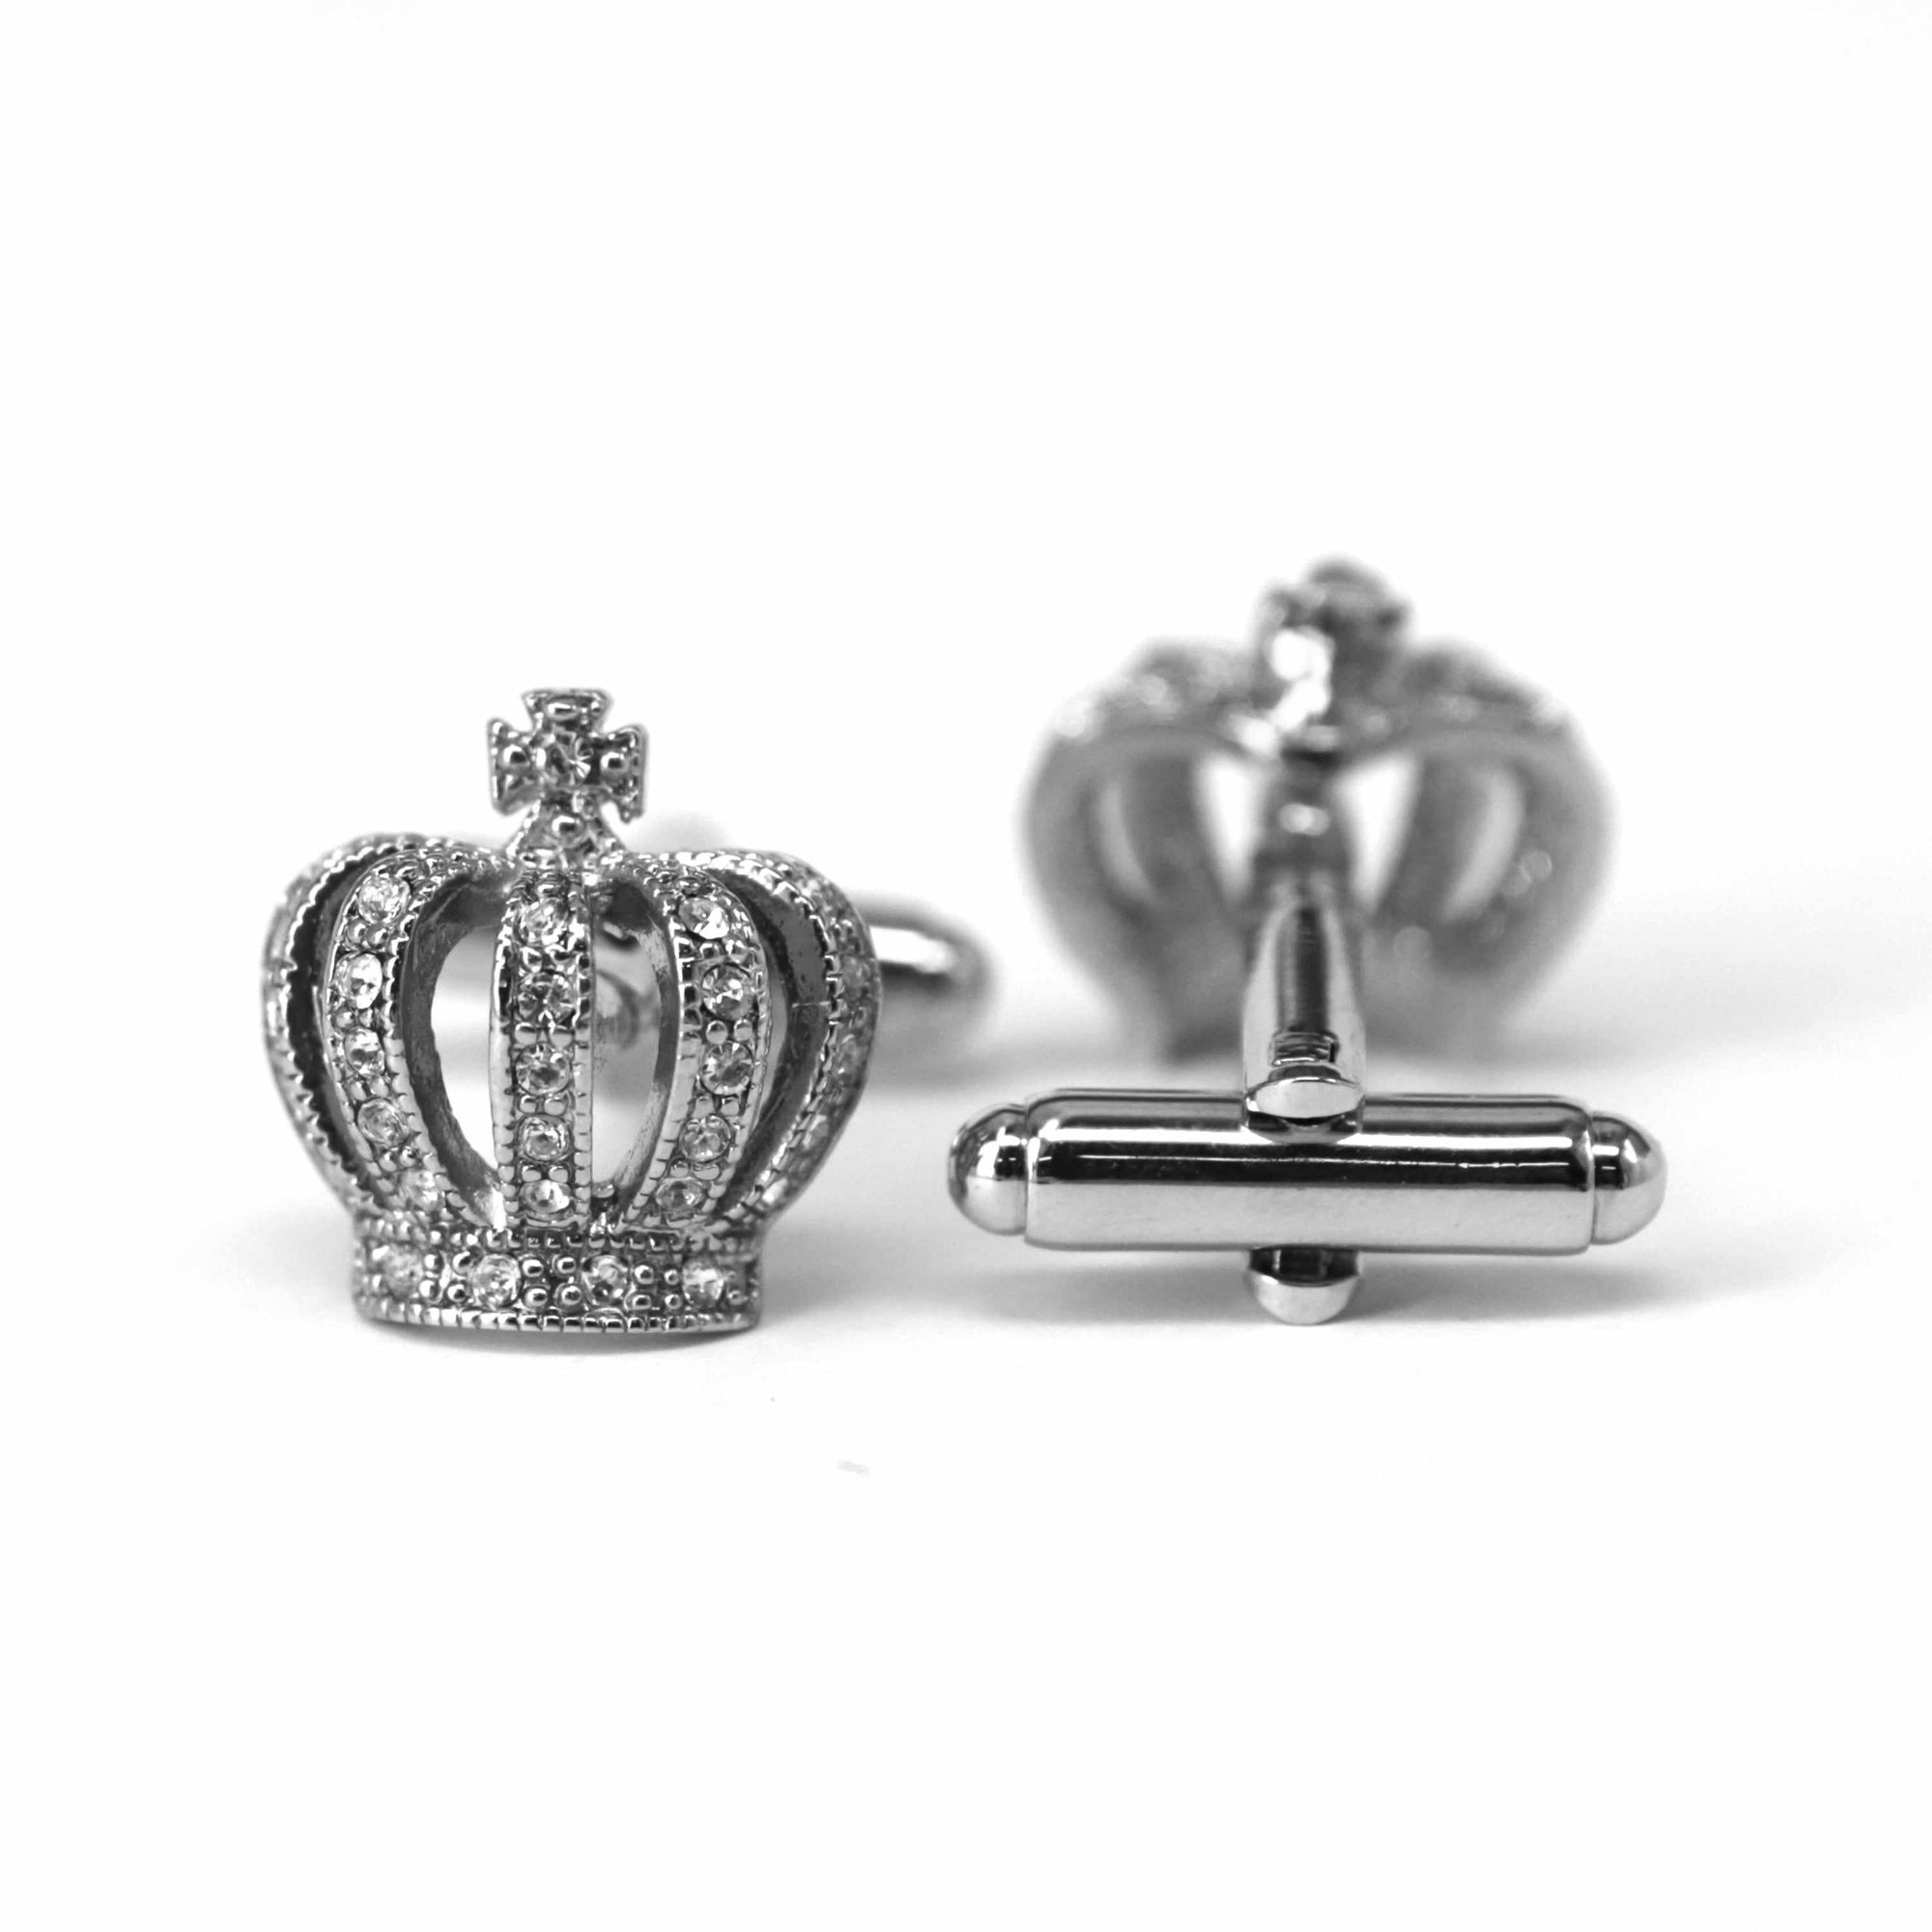 Crown Crystal Blue and White Crystal Cufflinks-Crystal Cufflinks-MarZthomson-Cufflinks.com.sg